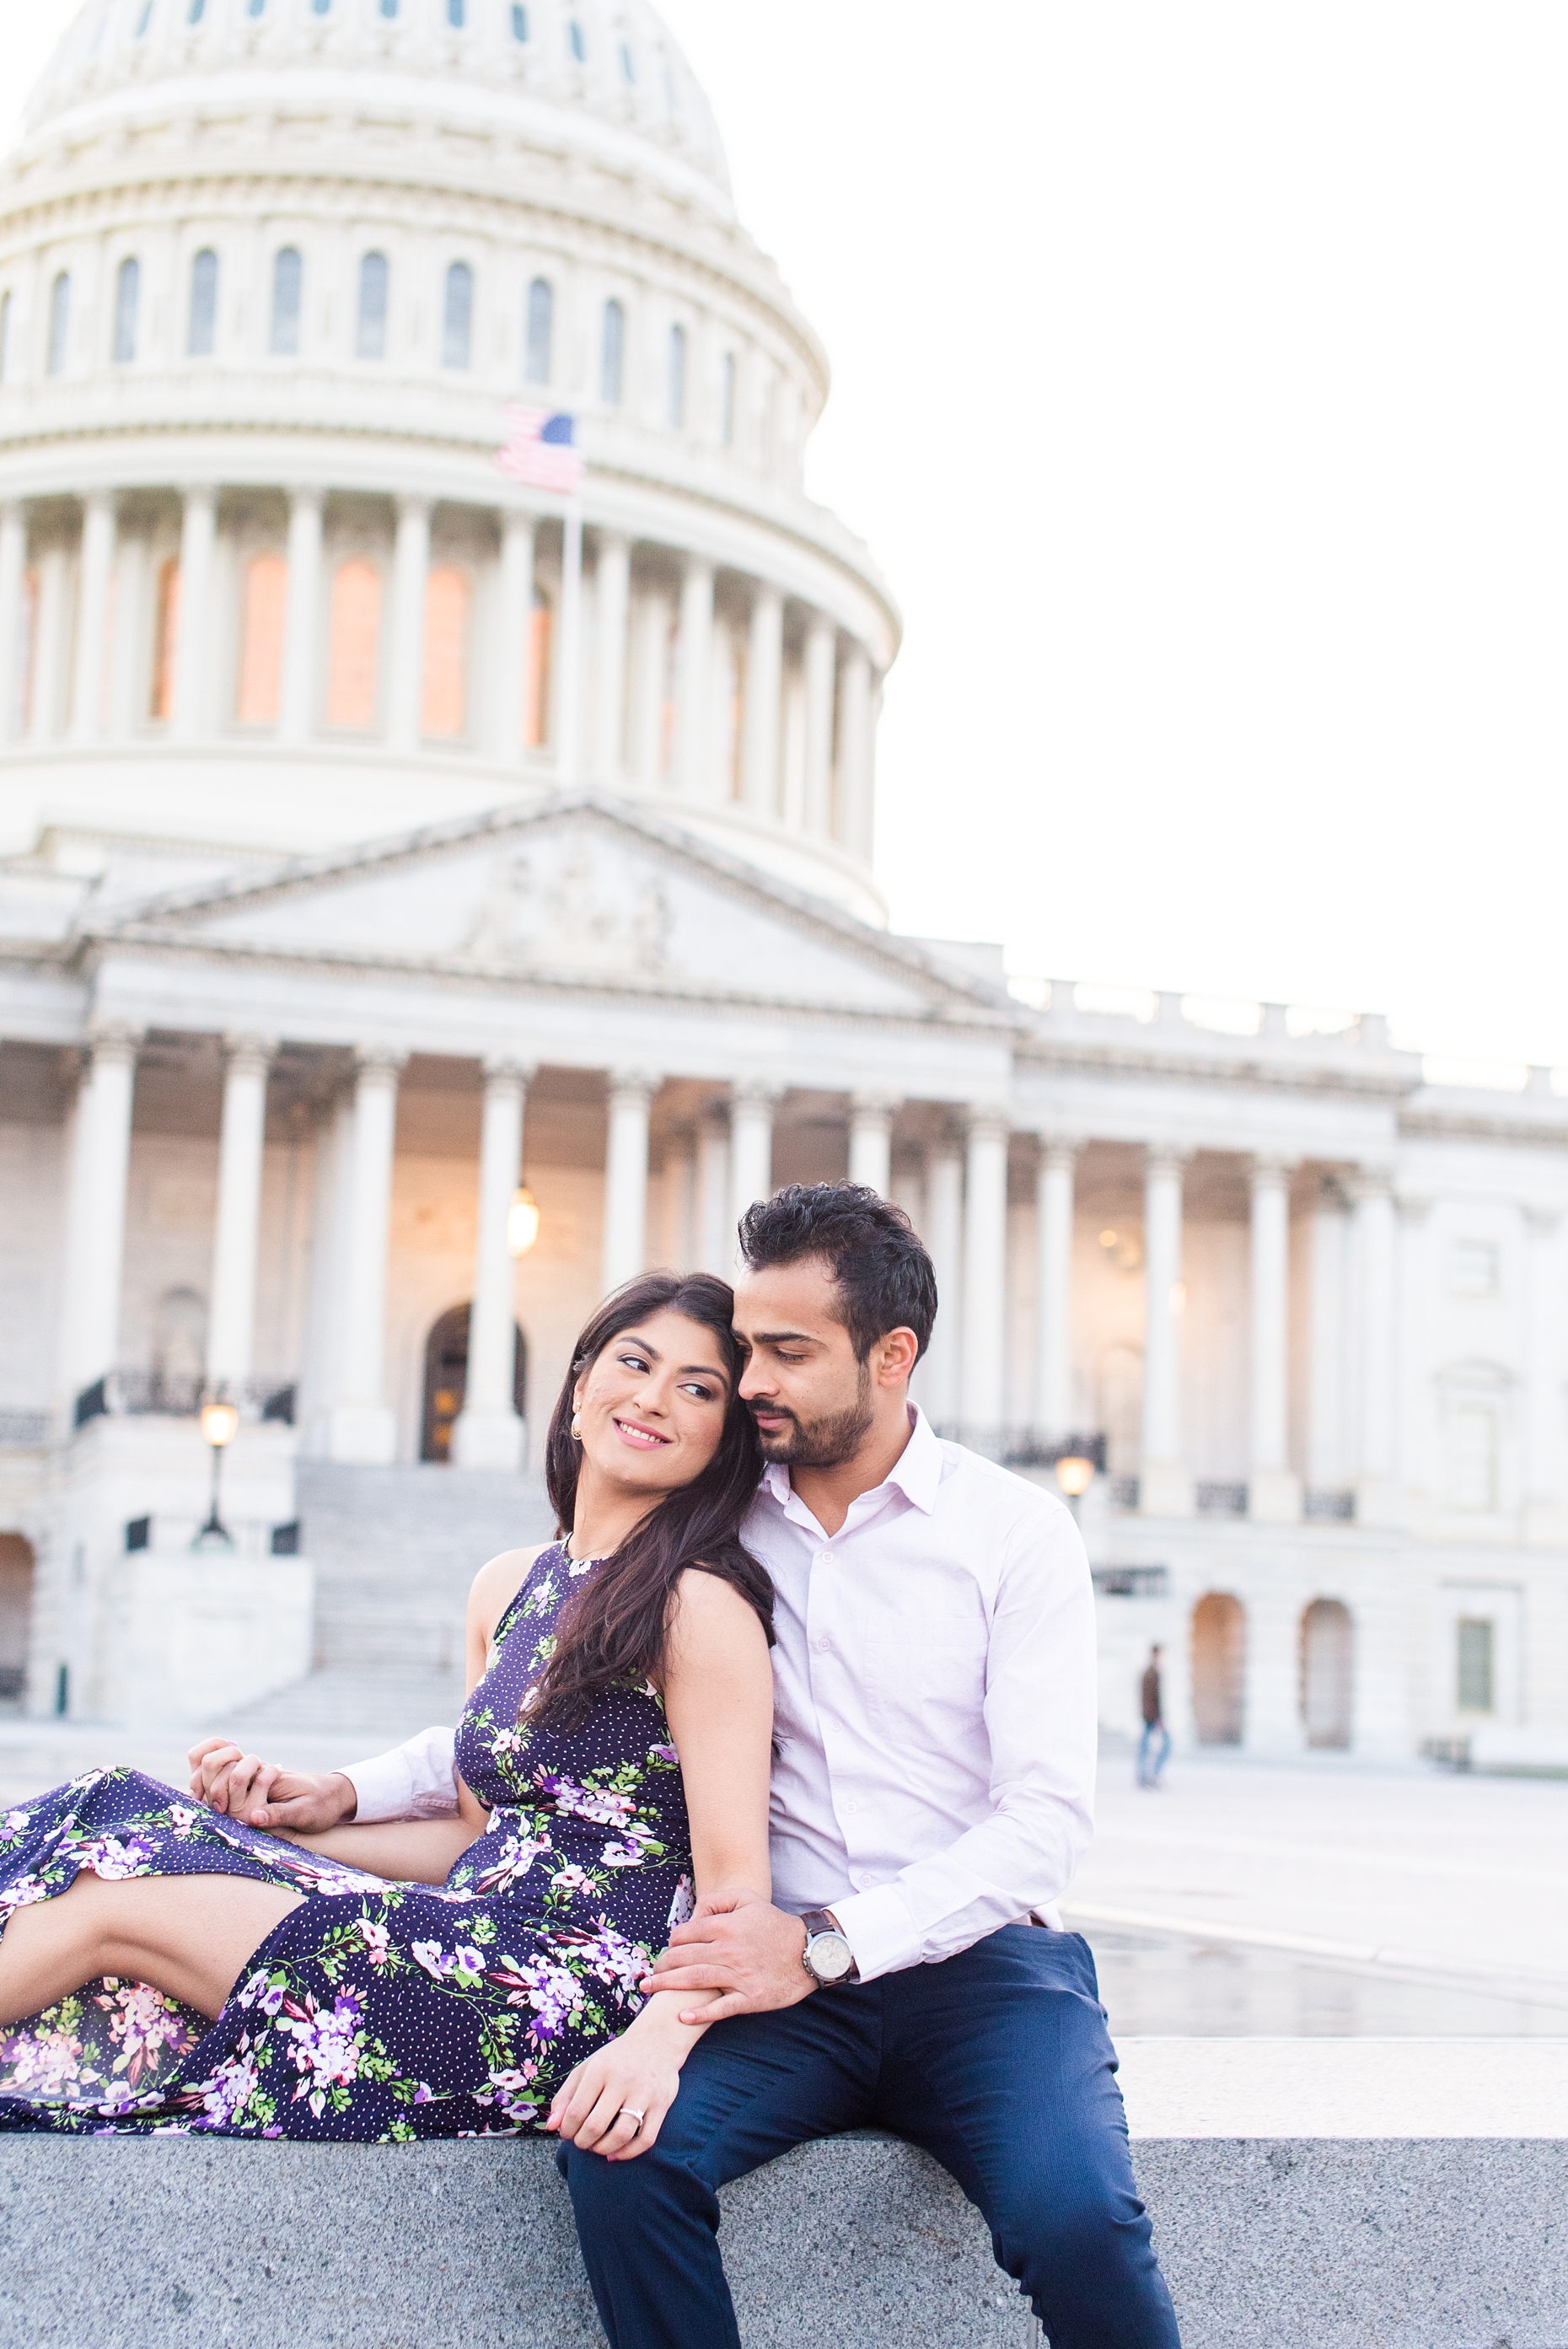 CapitolHillDCEngagementSessionPhotography-ManaliPhotography-023